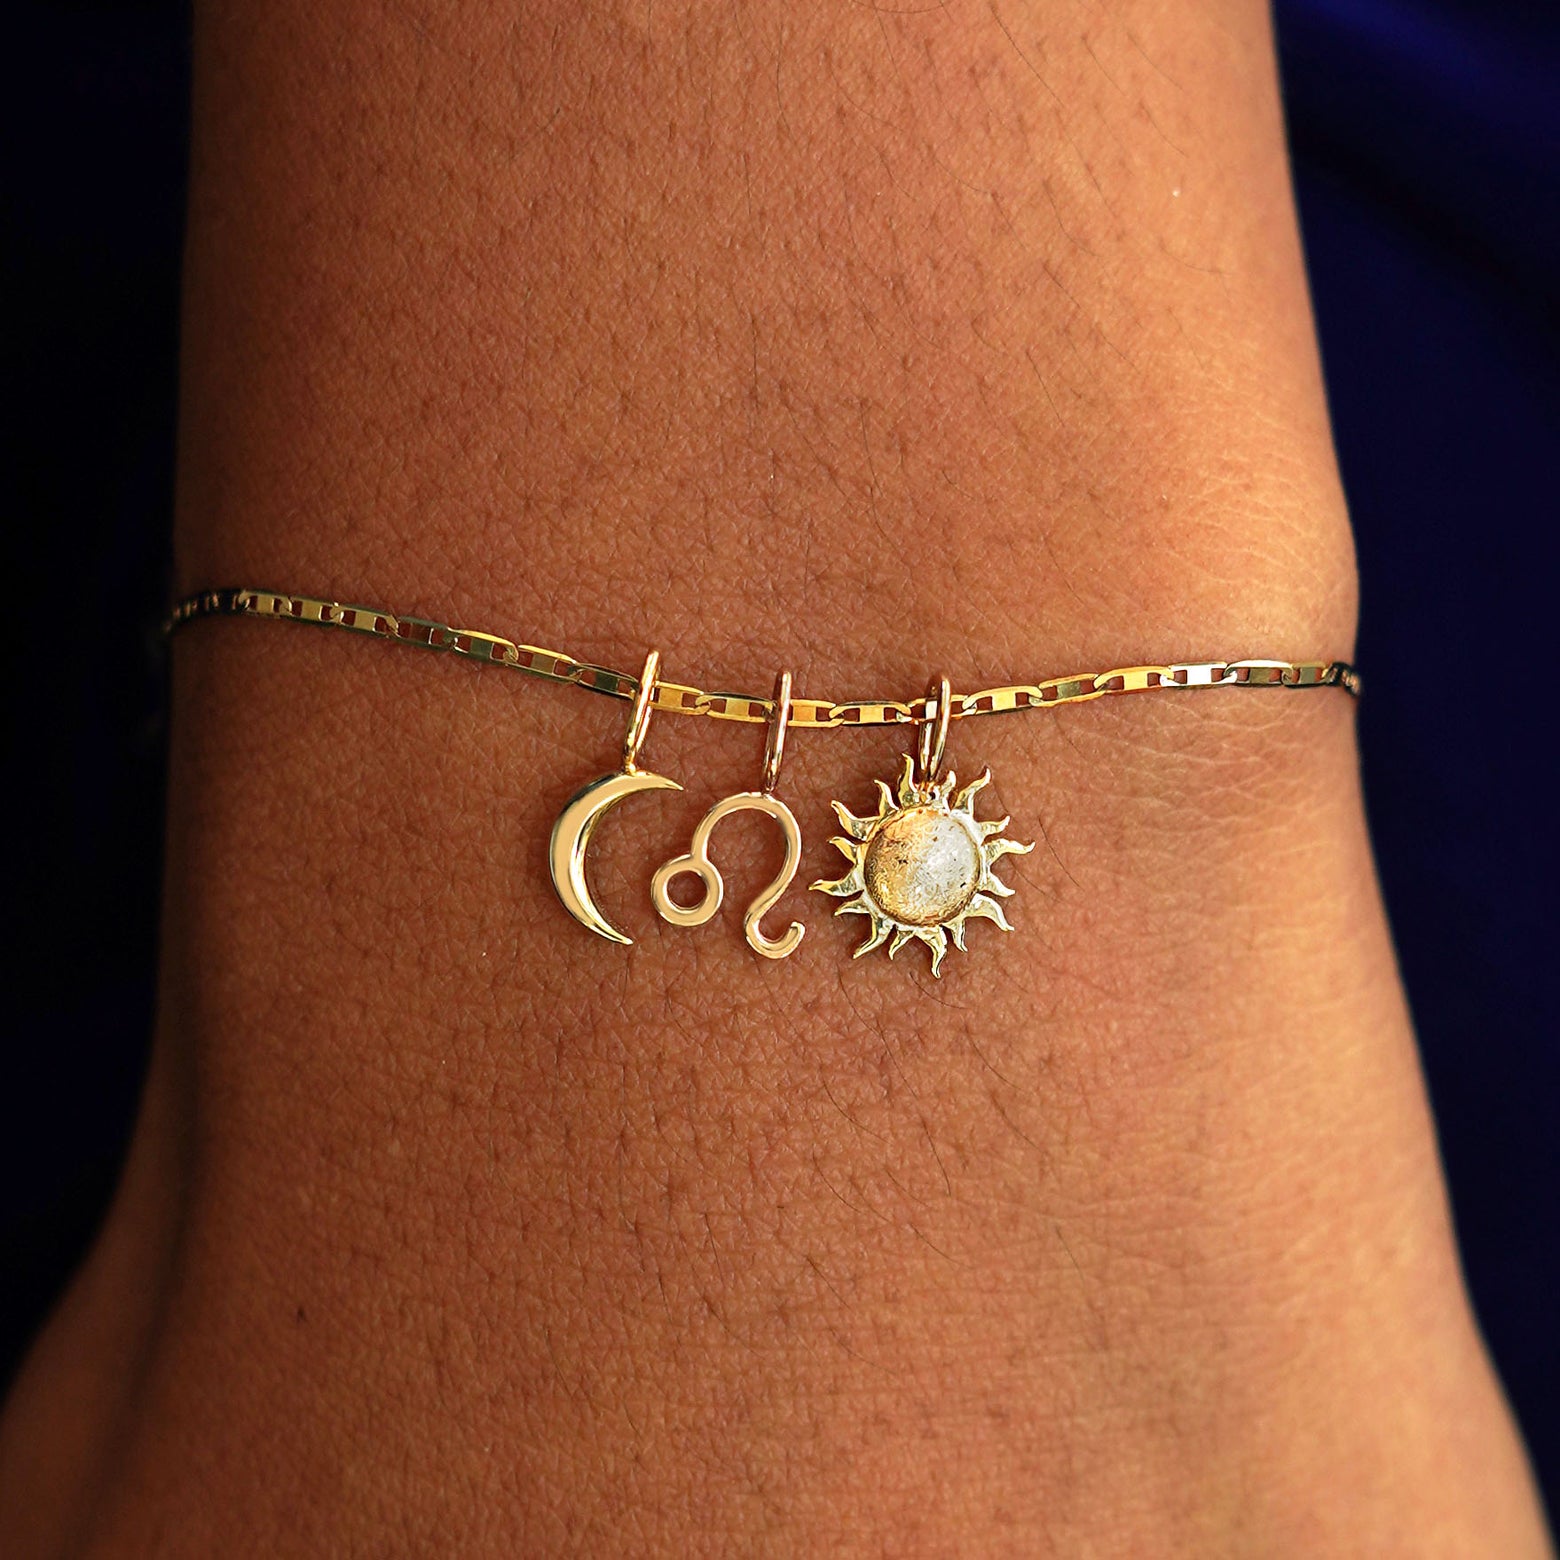 A model's wrist wearing a yellow gold Valentine Chain with a Moon Charm, A Zodiac Charm, and a Sun Charm